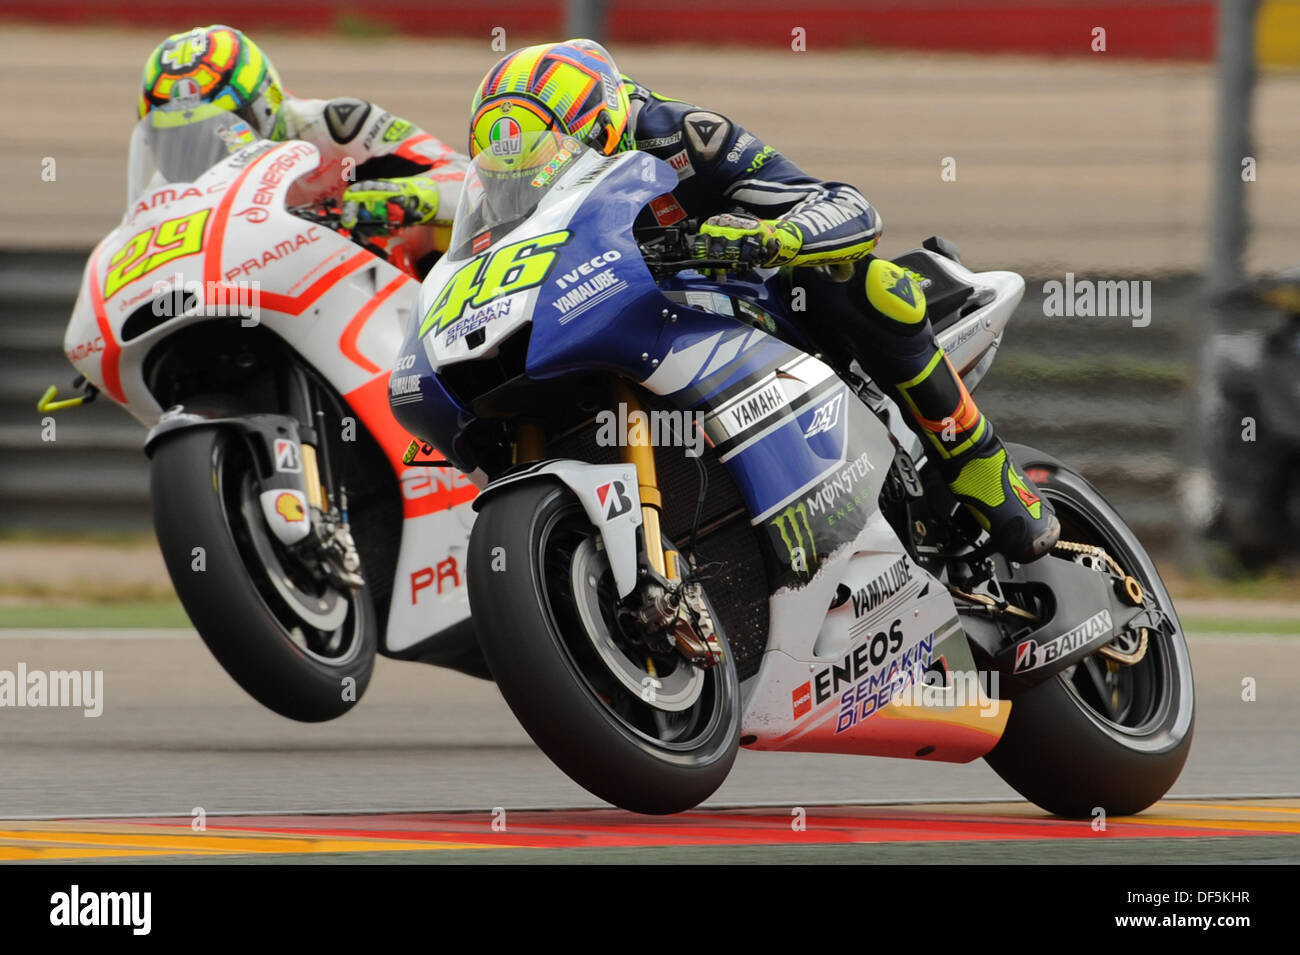 Alcaniz, Spain. September 28th 2013. Valentino Rossi (Yamaha Factory racingm) during the qualifying sessions from Aragon Motorland Credit:  Gaetano Piazzolla/Alamy Live News Stock Photo